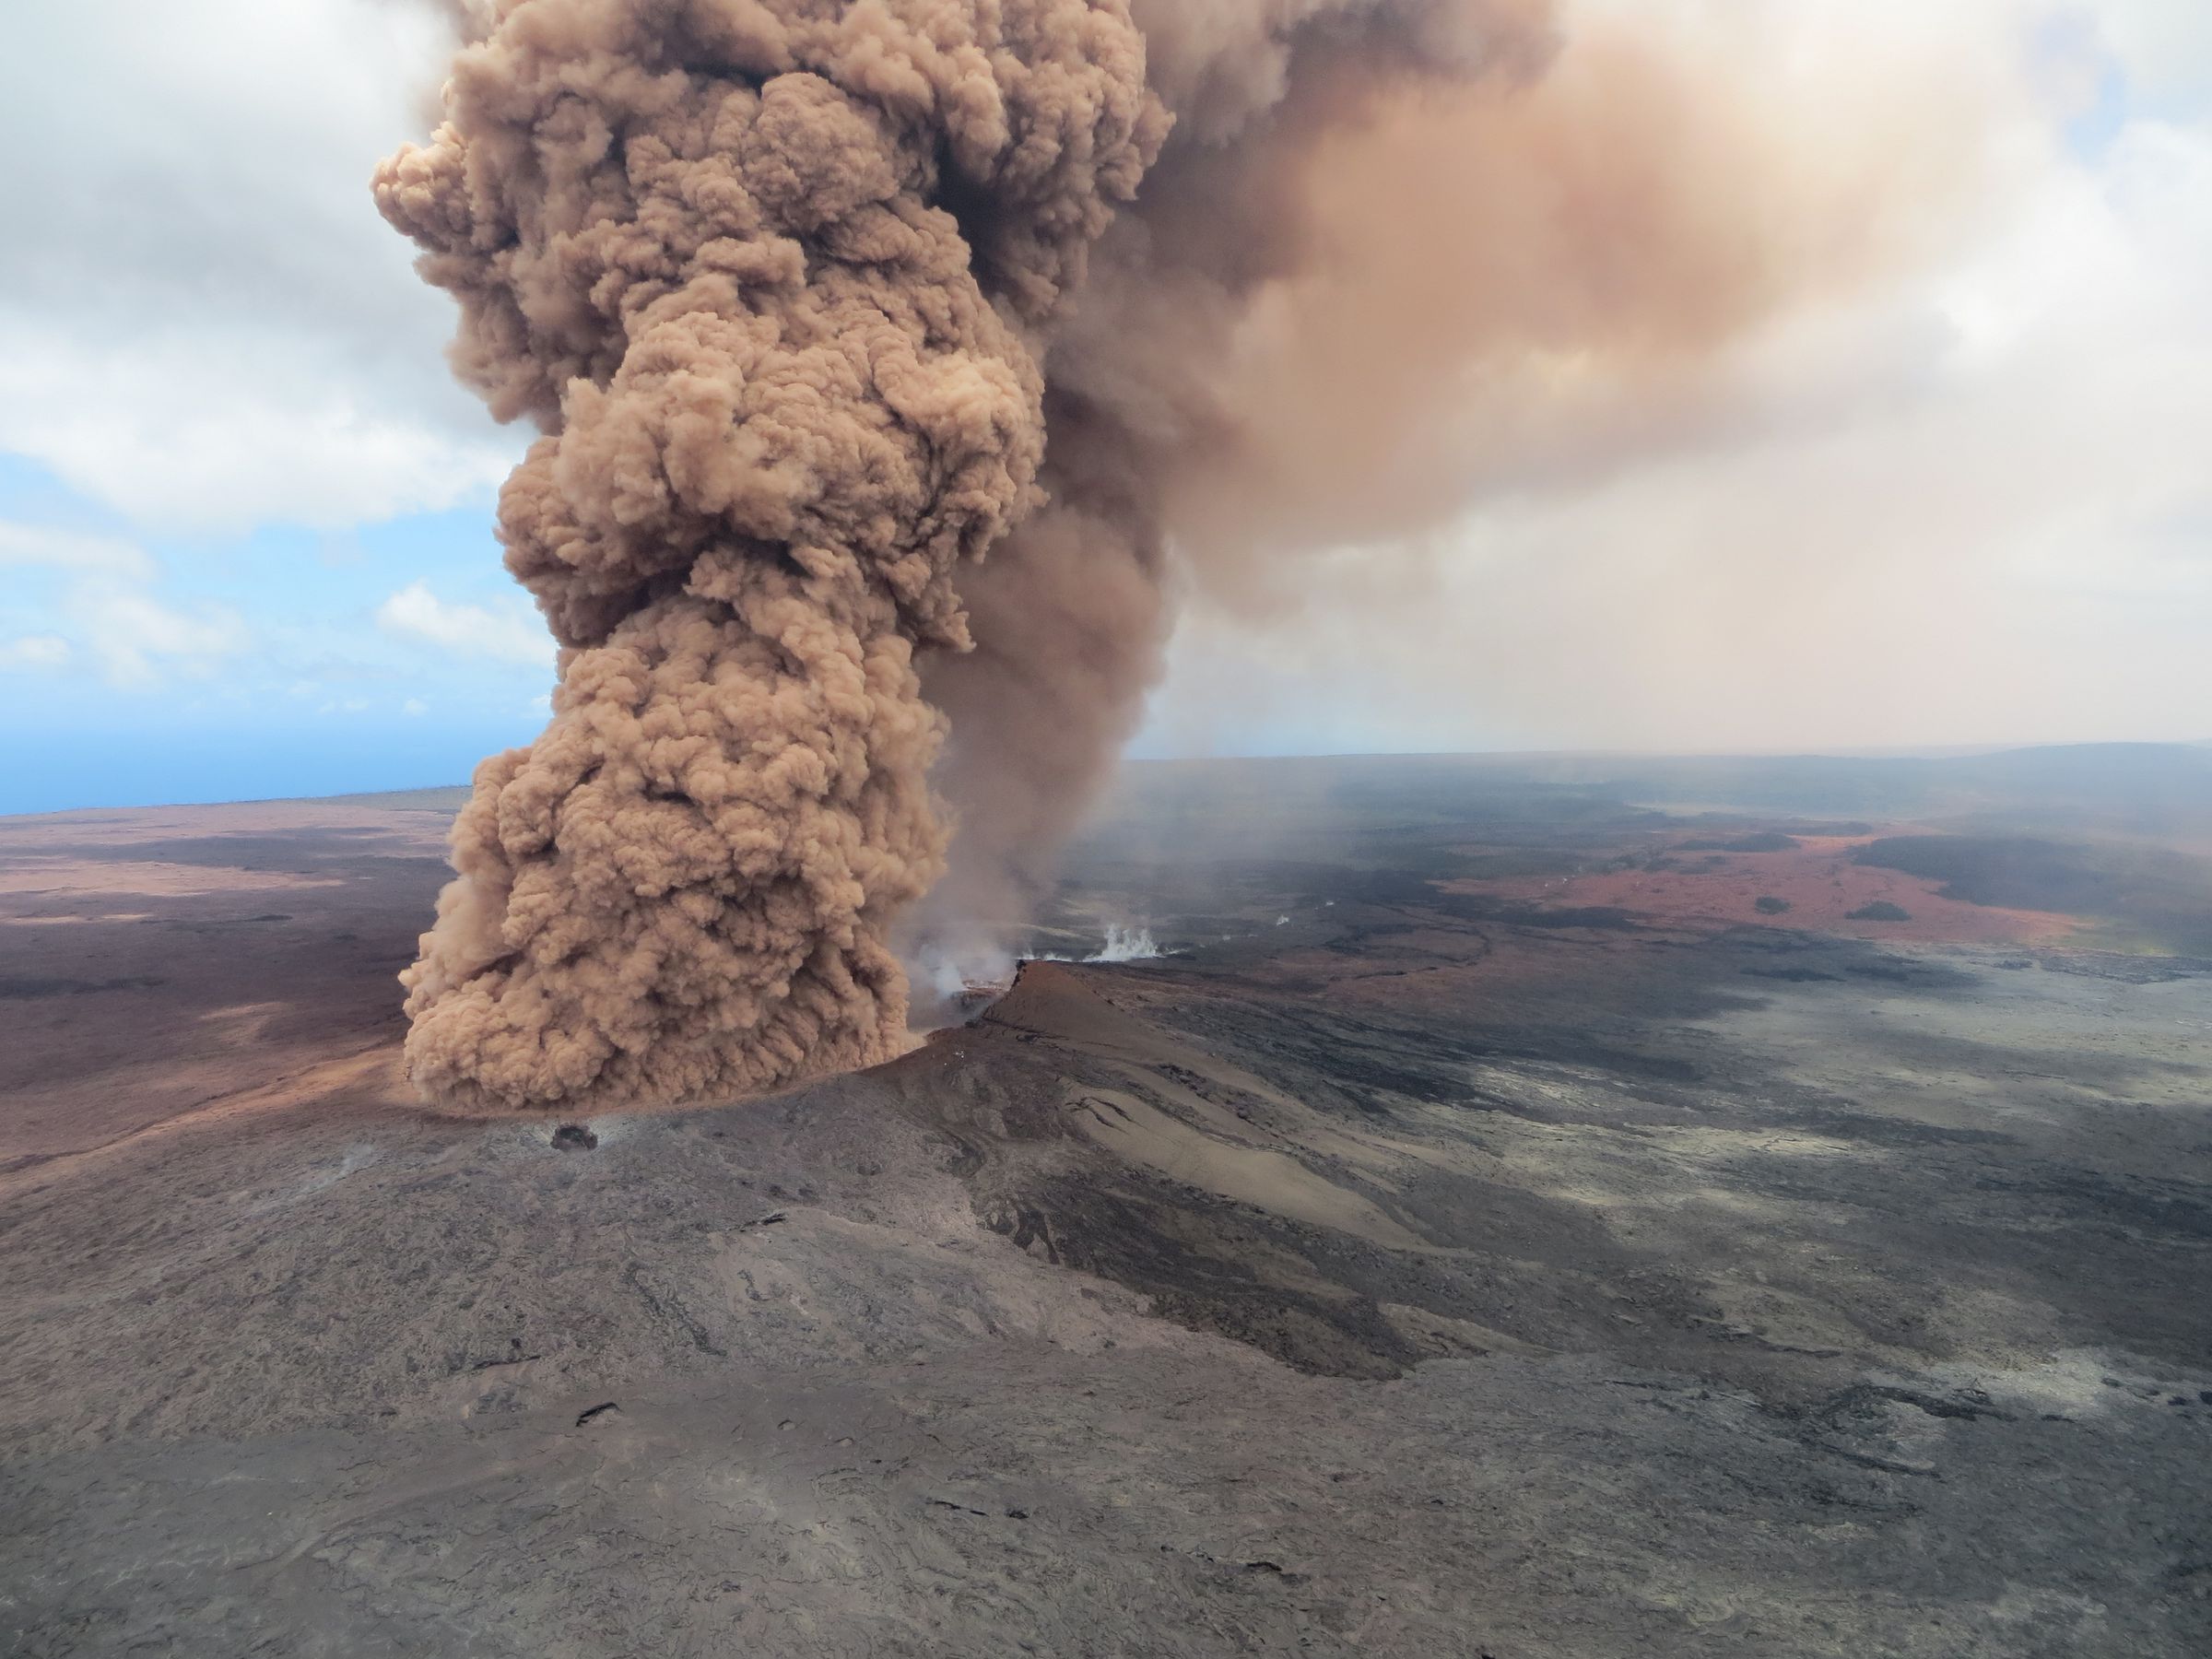 A column of reddish-brown ash plume coming out of the Kilauea volcano on May 4th, 2018.